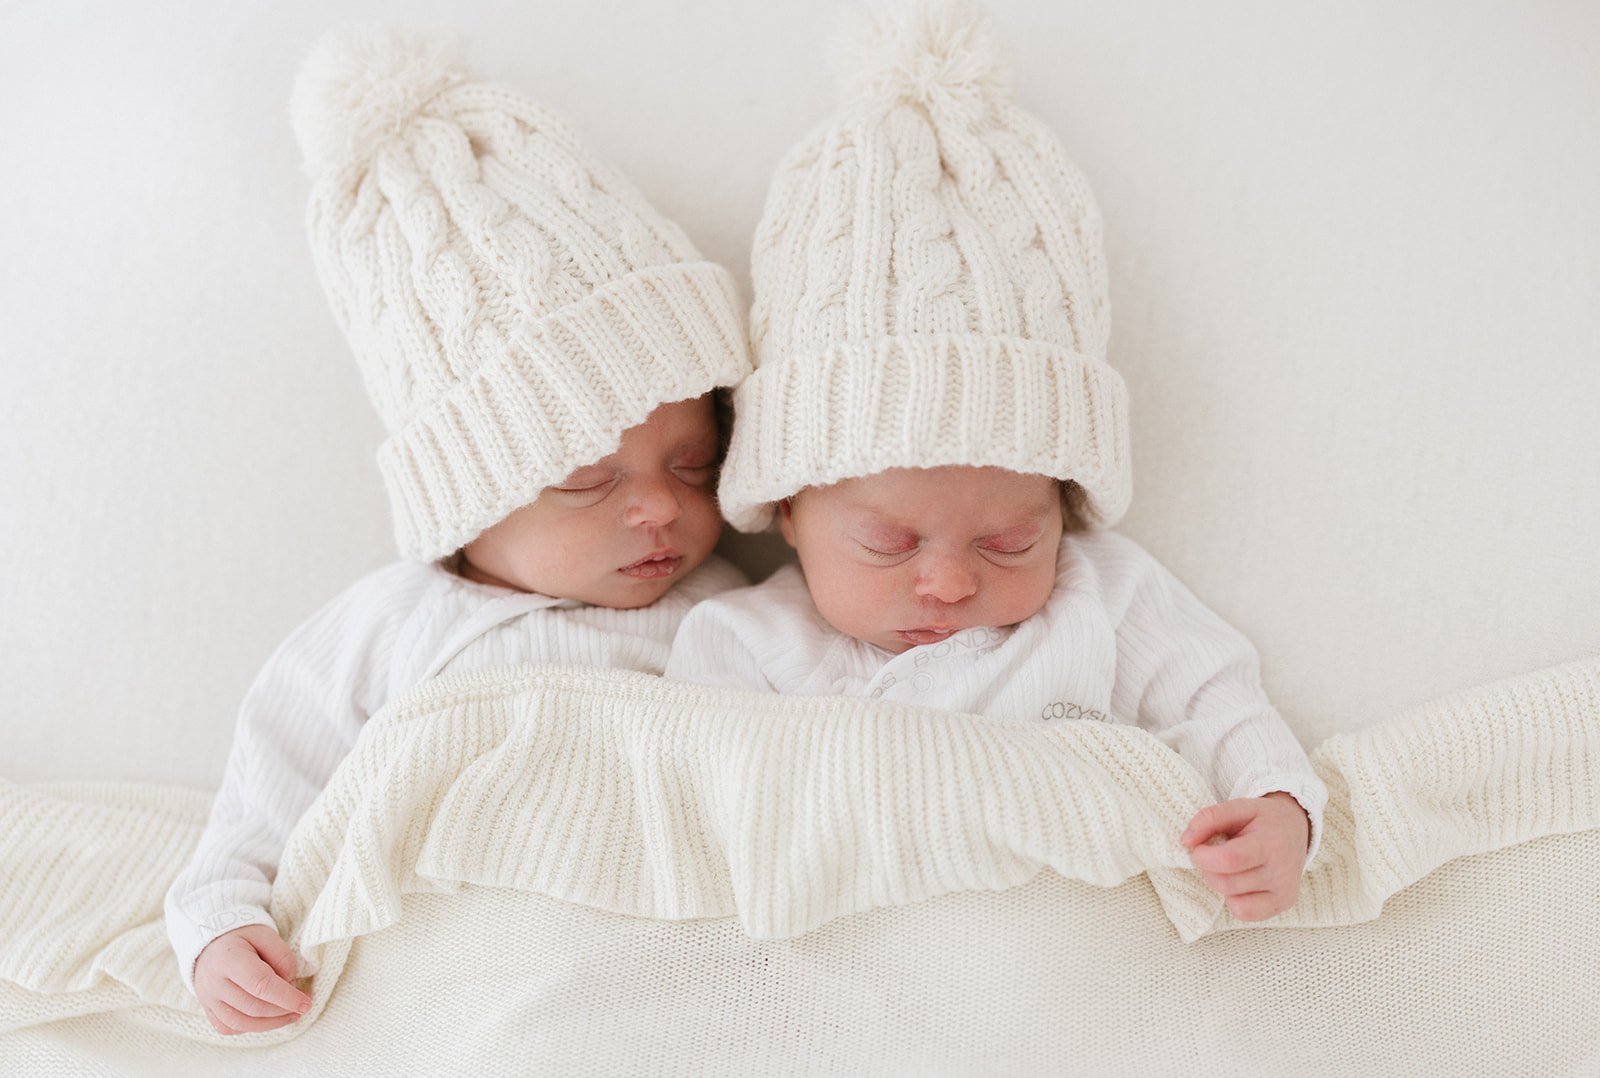  twin newborn babies photographed with white knit beanies  